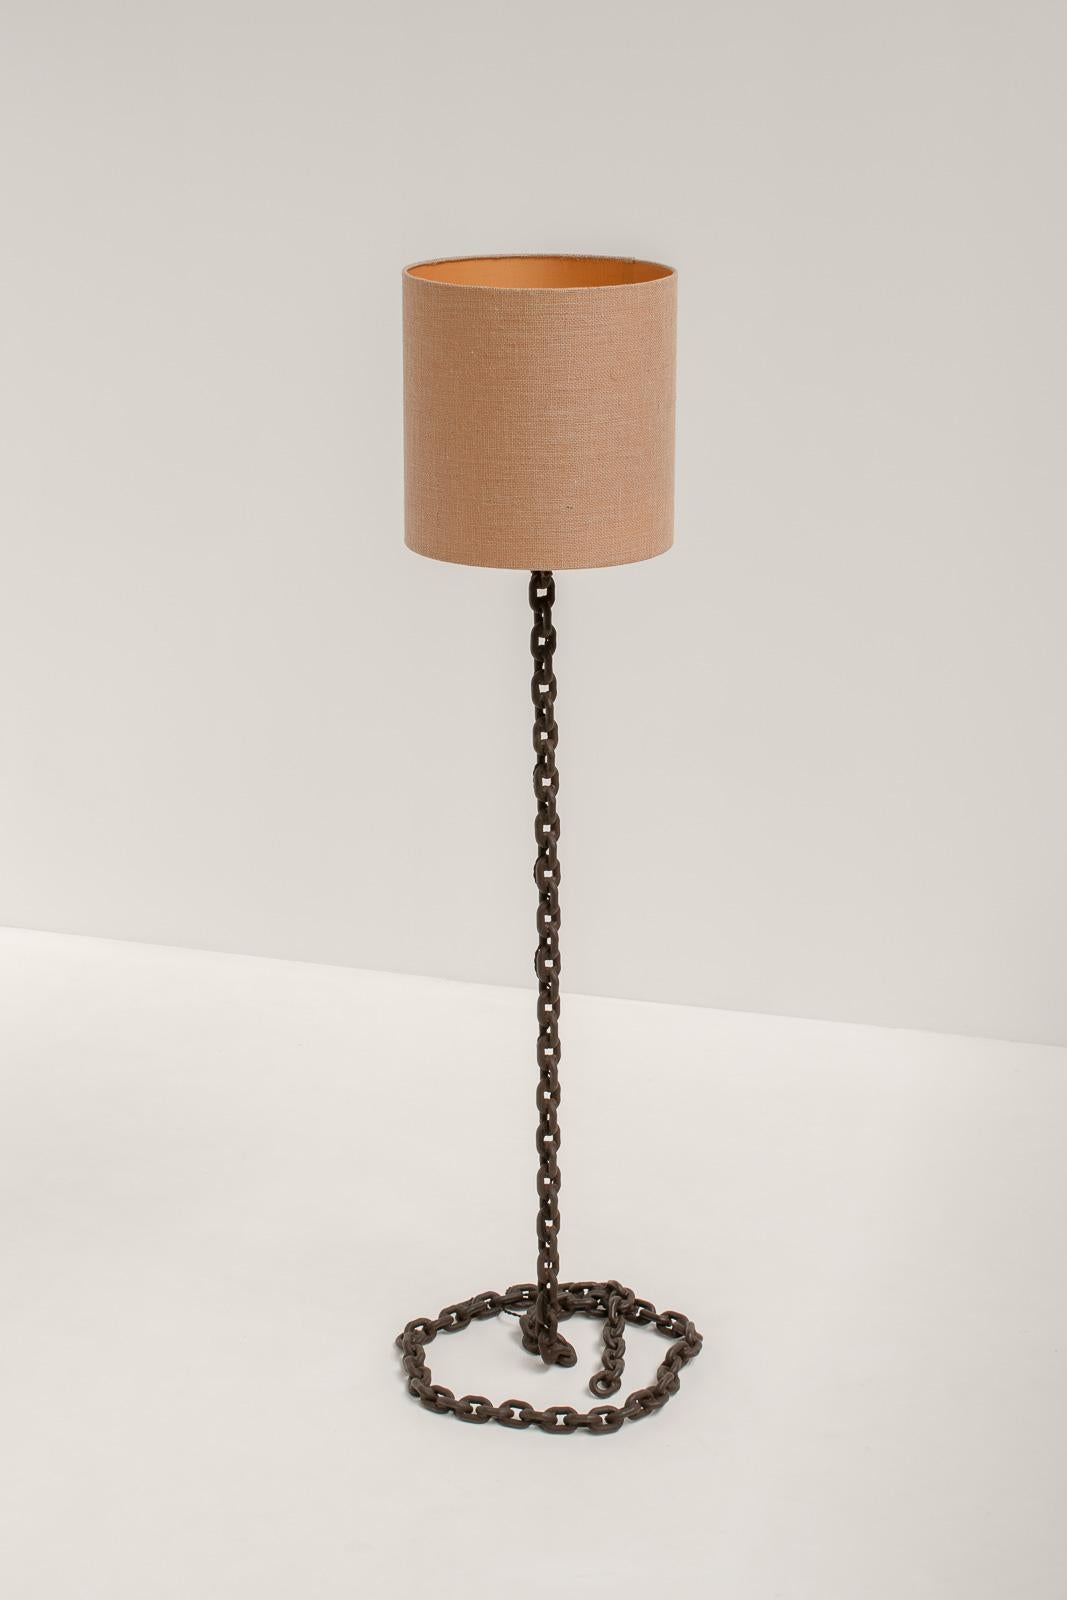 Beautiful brutalist XXL chain link floor lamp in the style of Franz West. Sourced in the south of France. From the 1970s. 

Robust and warm are the words that come to mind with this lamp. This tall chain link floor lamp is reminiscent of the designs